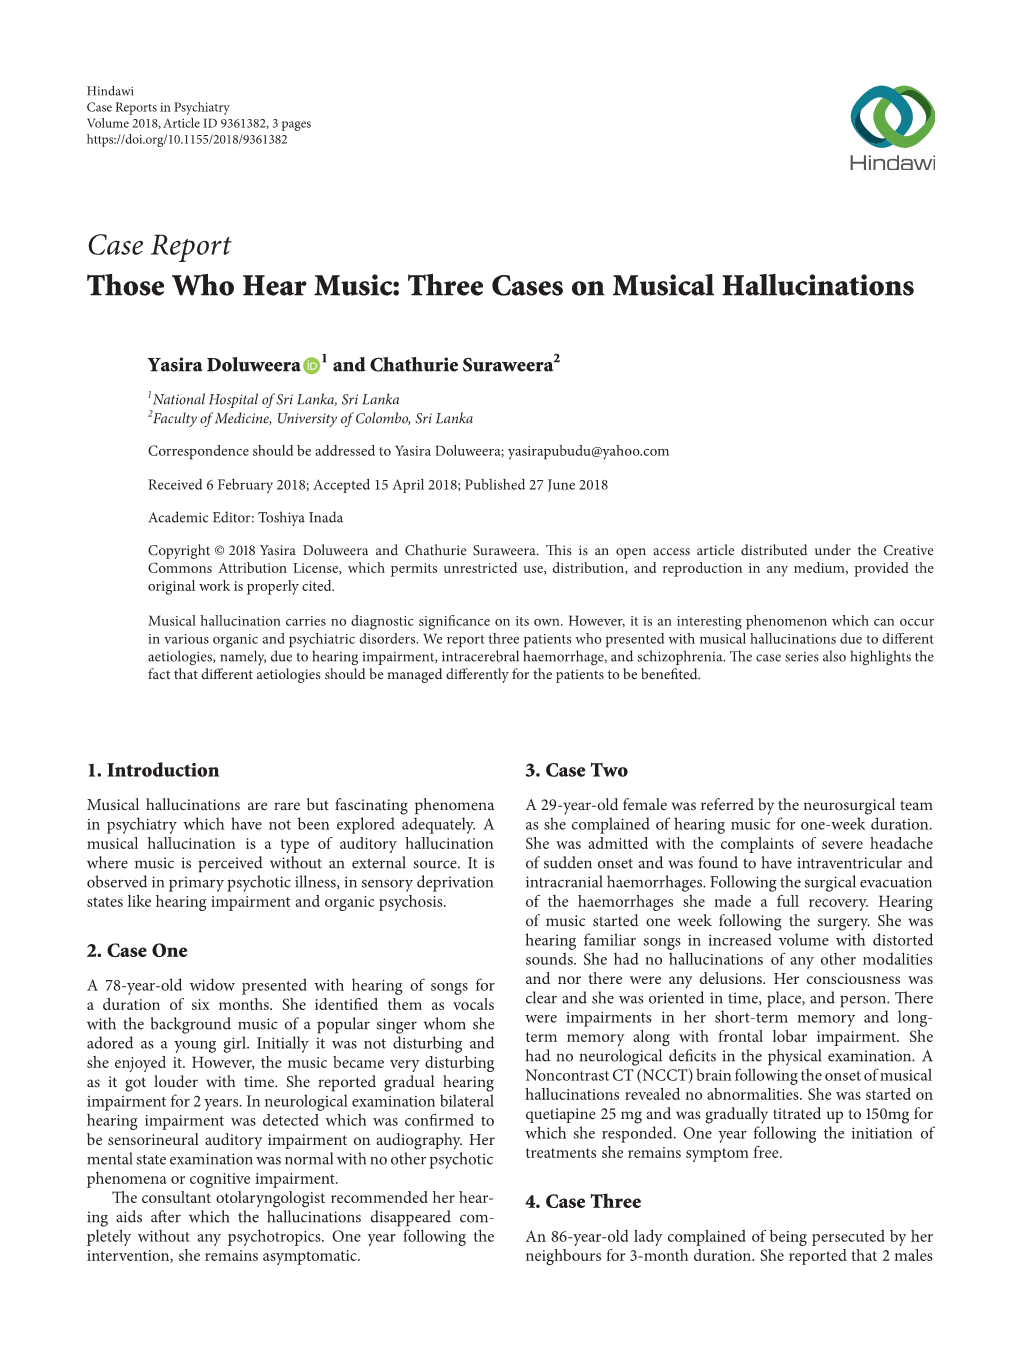 Case Report Those Who Hear Music: Three Cases on Musical Hallucinations